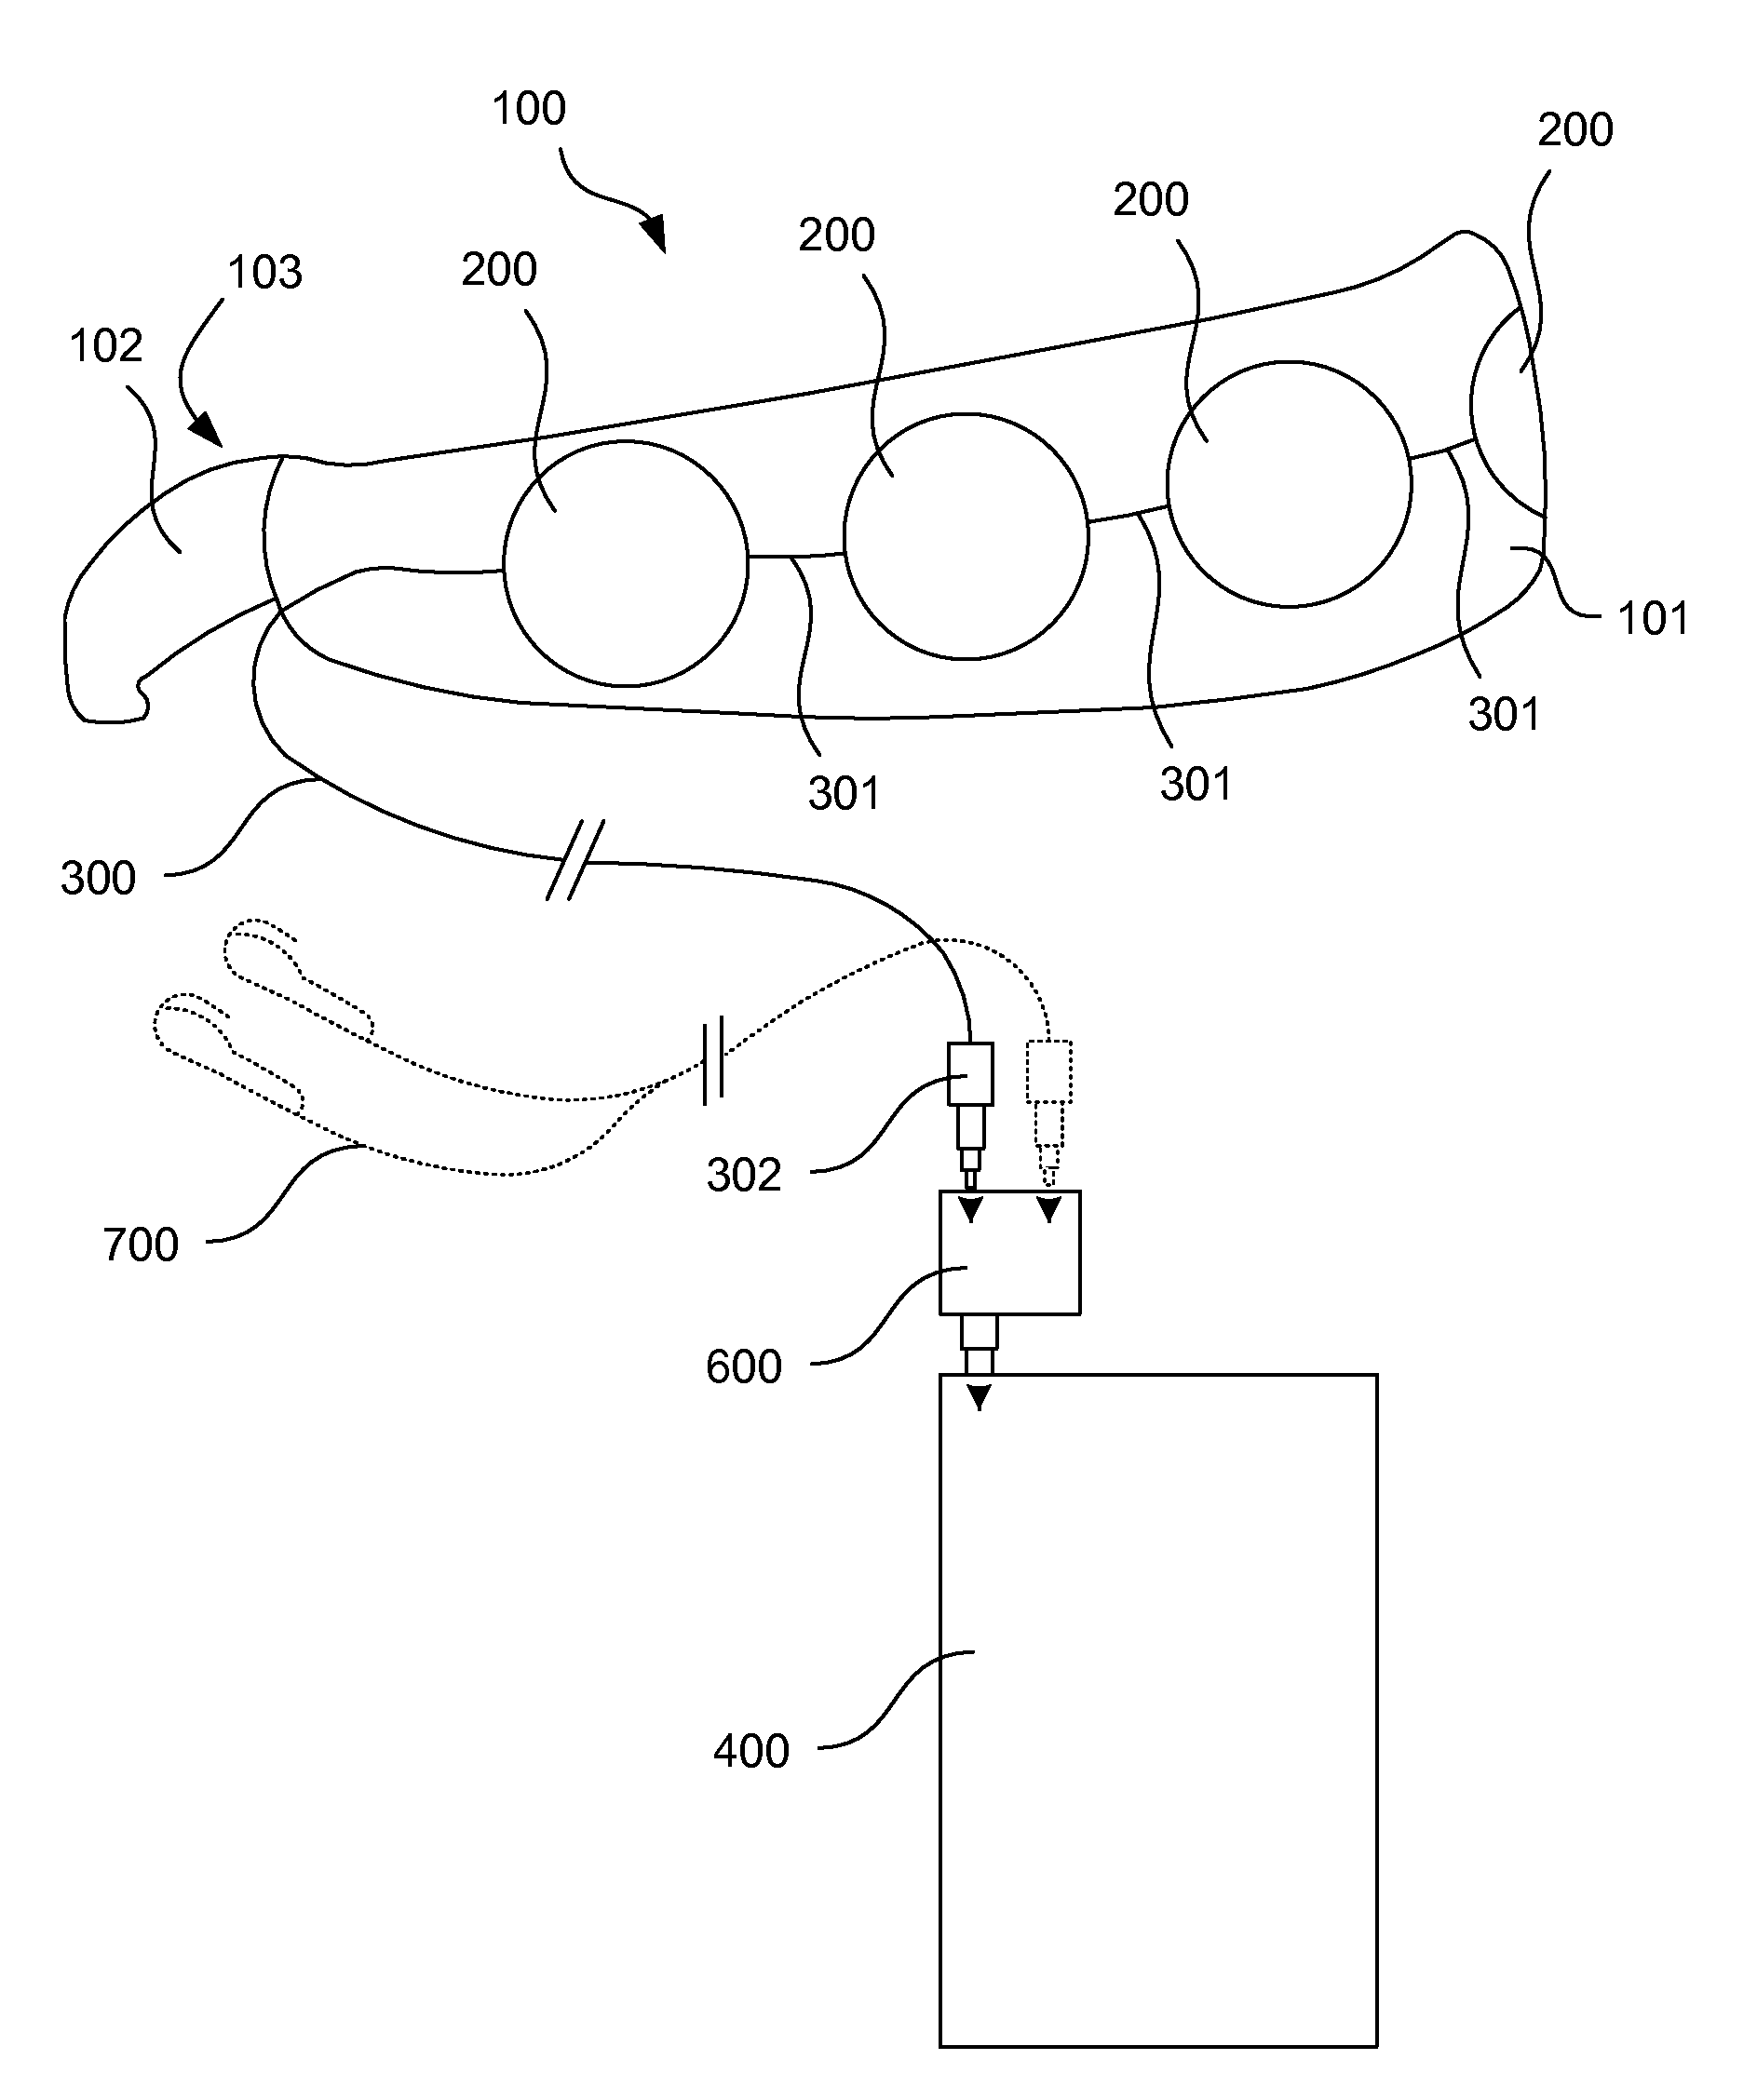 Apparatus and Method for Transmitting Auditory Bone Conduction